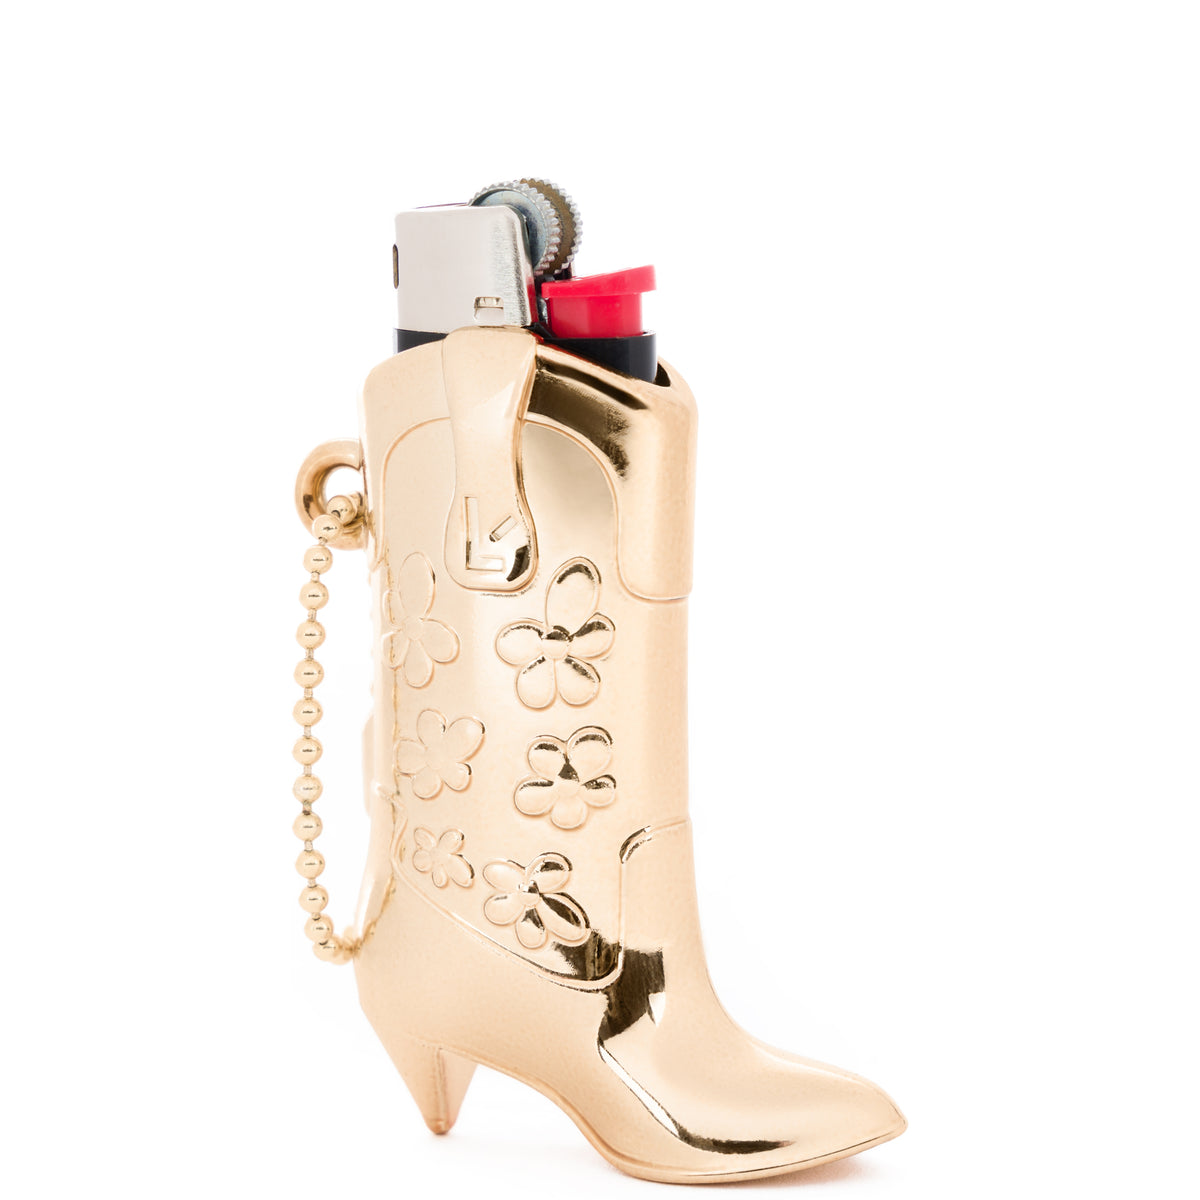 Thelma Boot Keychain in Gold